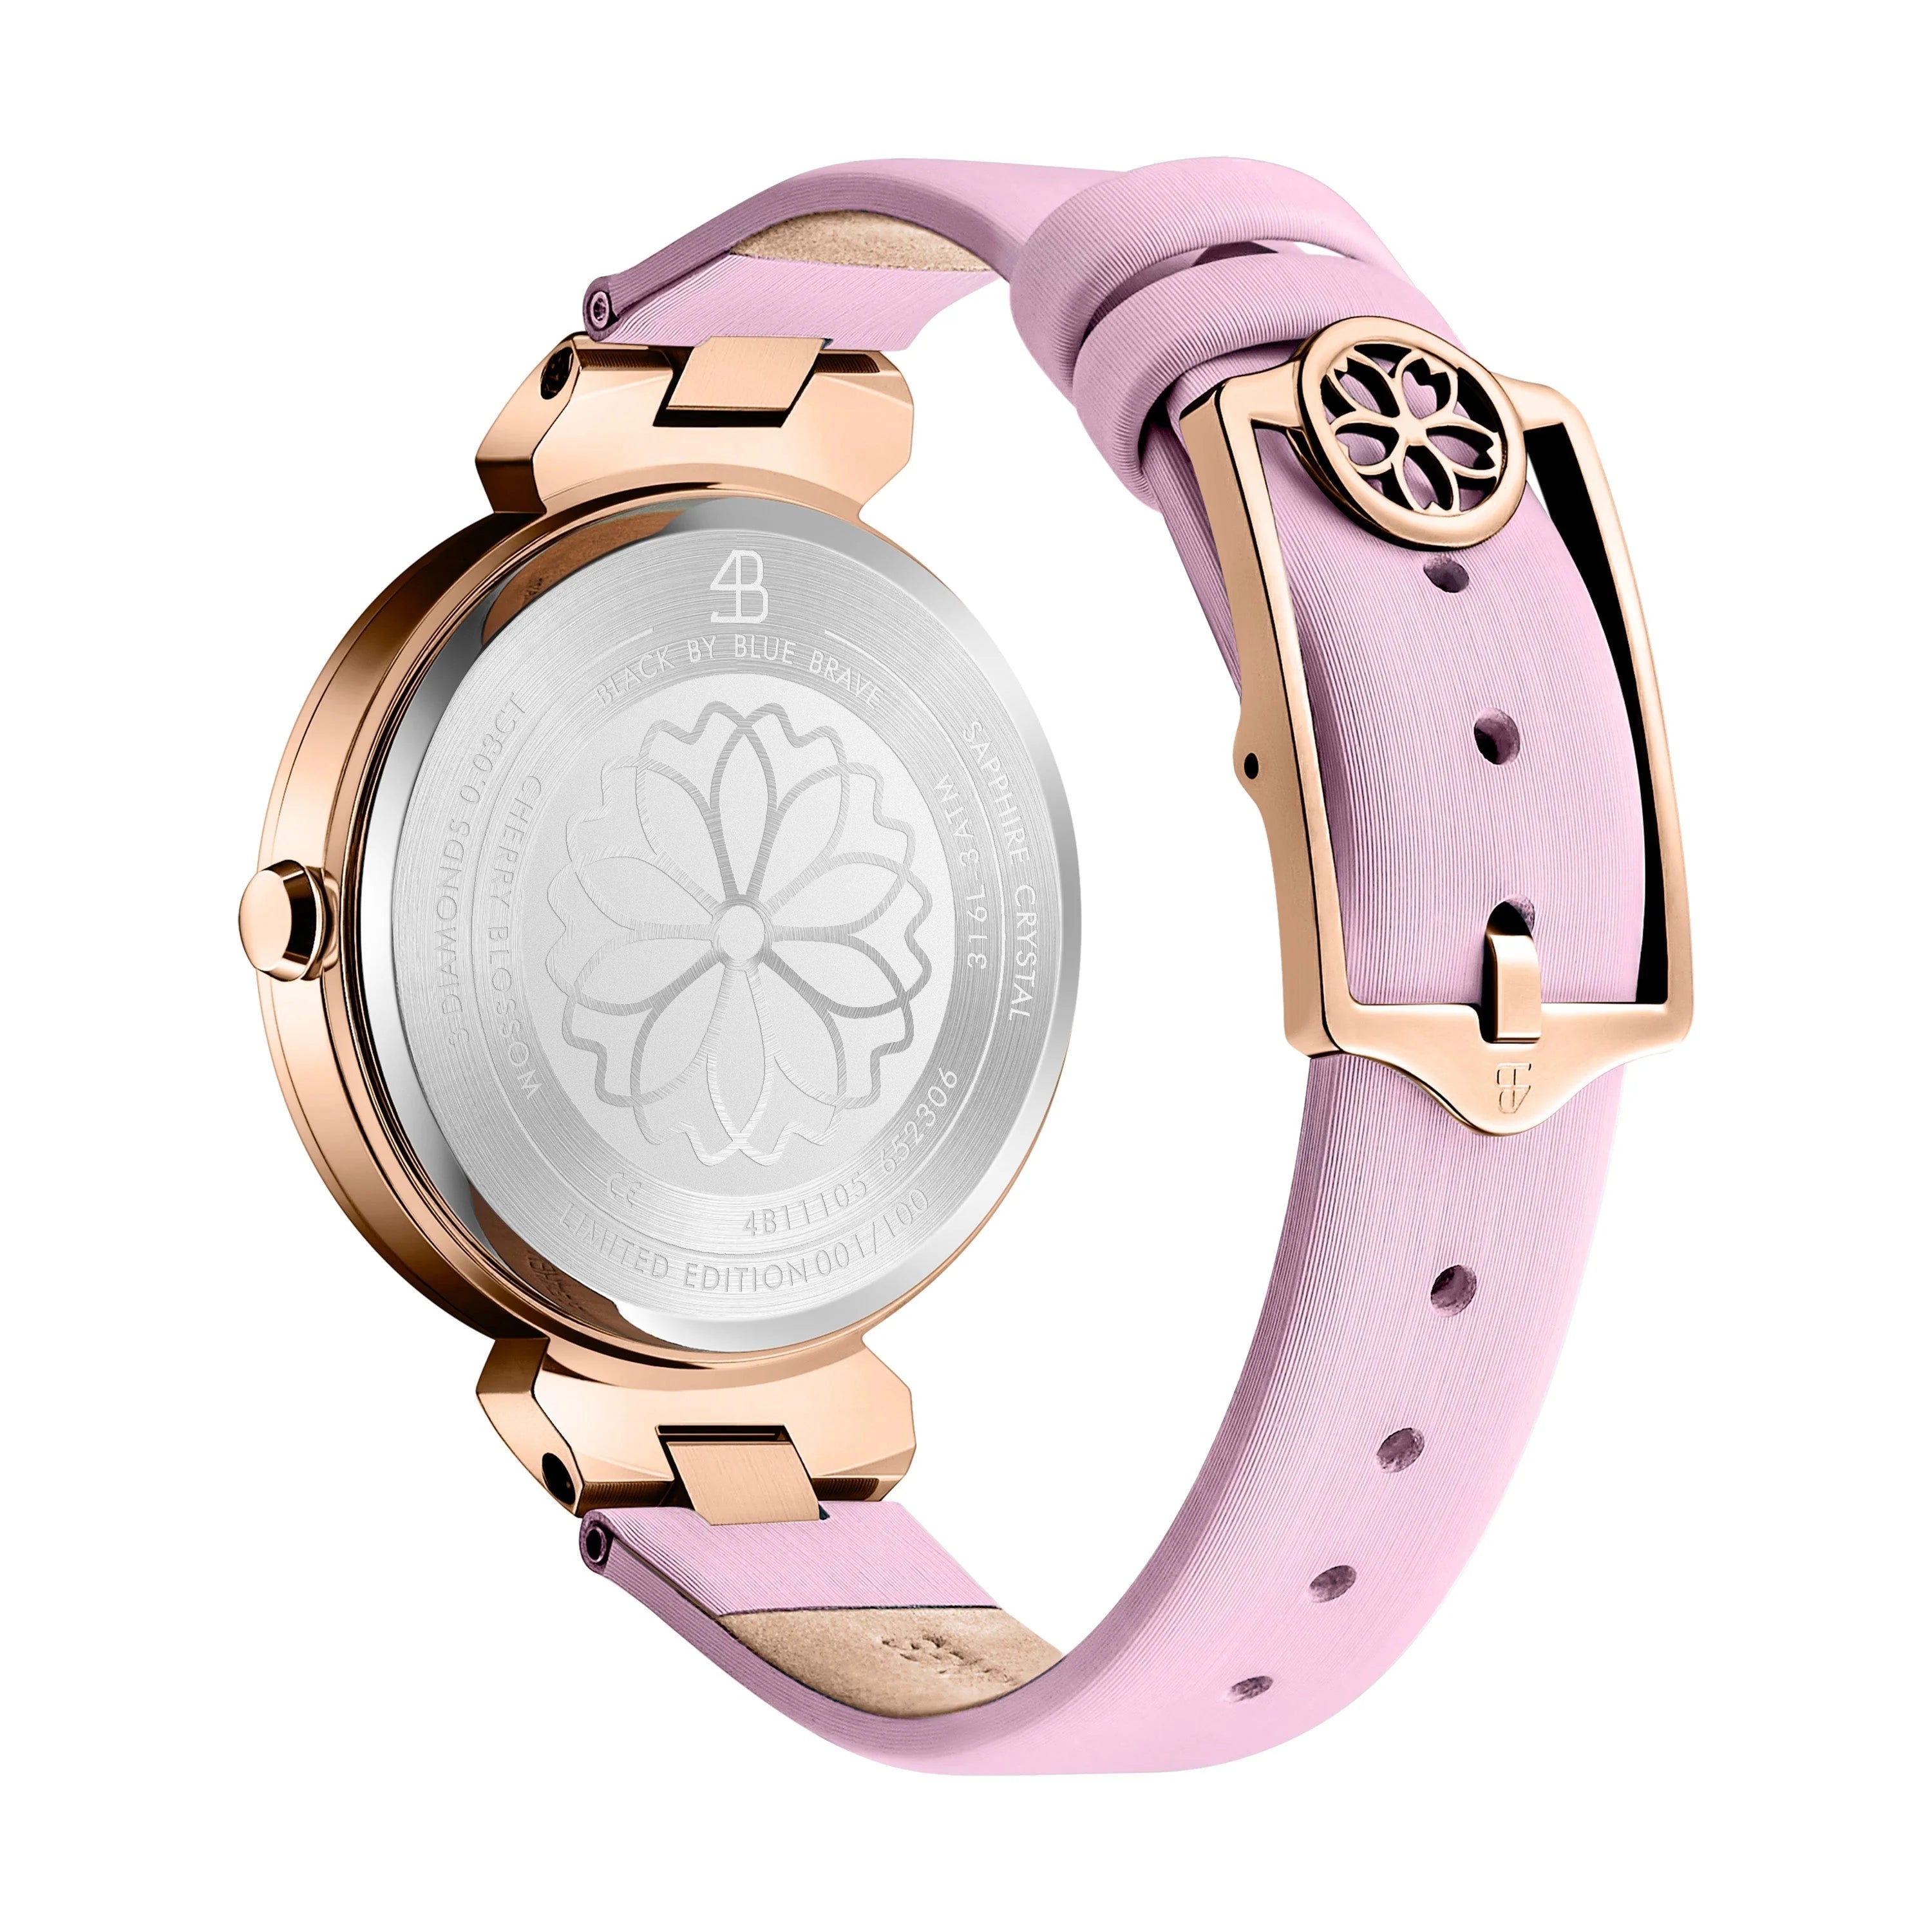 Pink Cherry Blossom Watch With Flower Ceramic Necklace